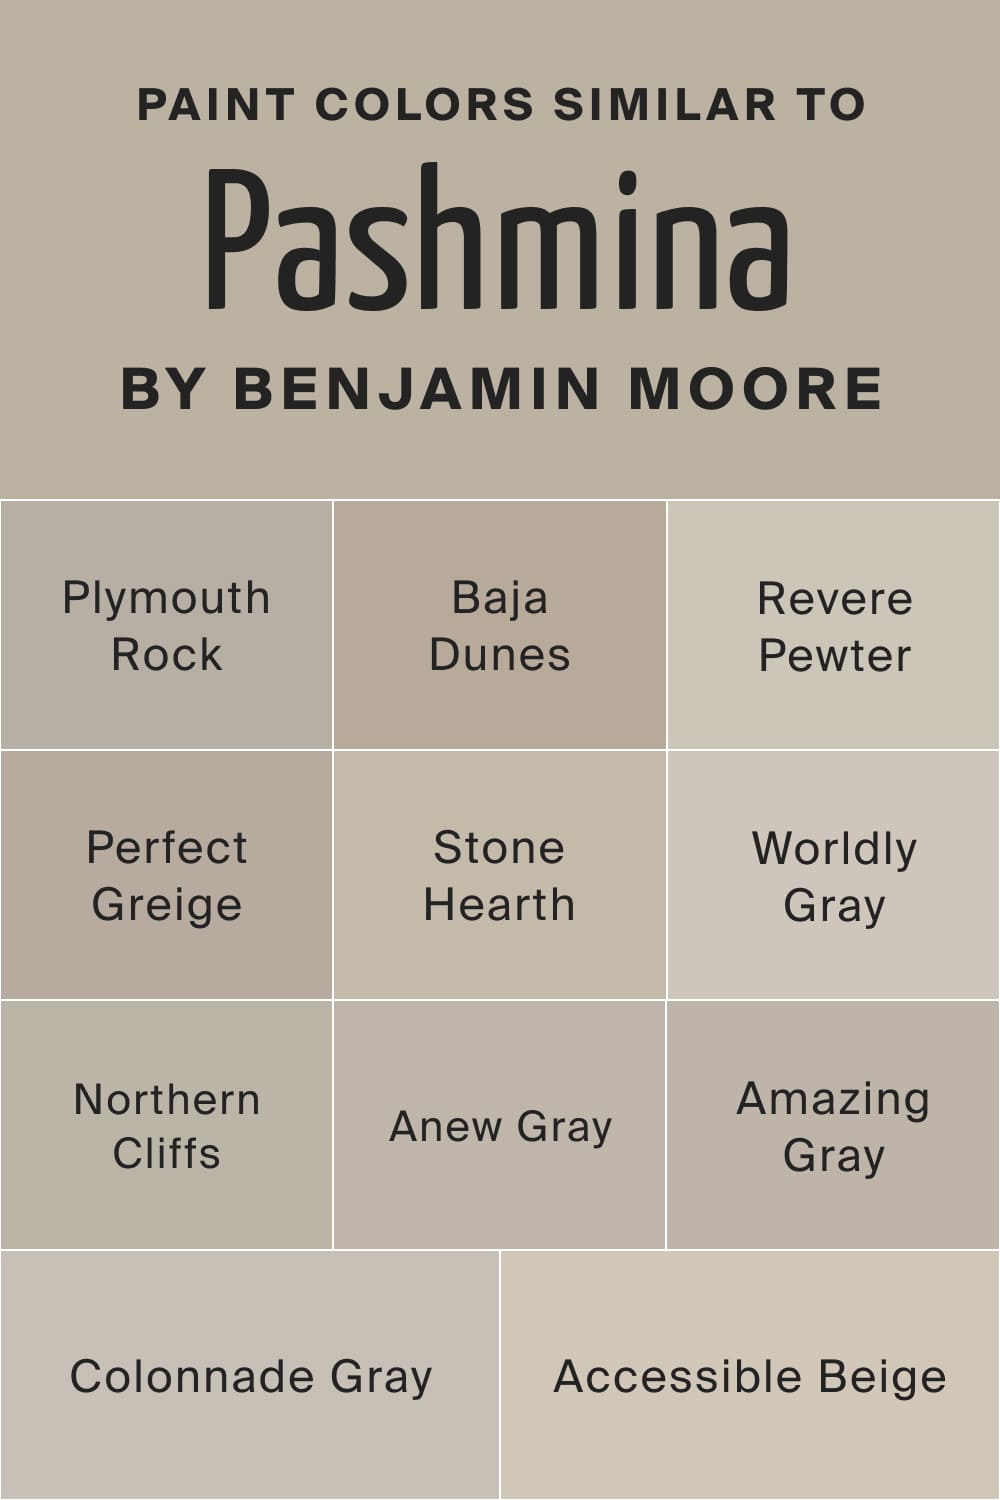 Paint Colors Similar to Pashmina AF 100 by Benjamin Moore